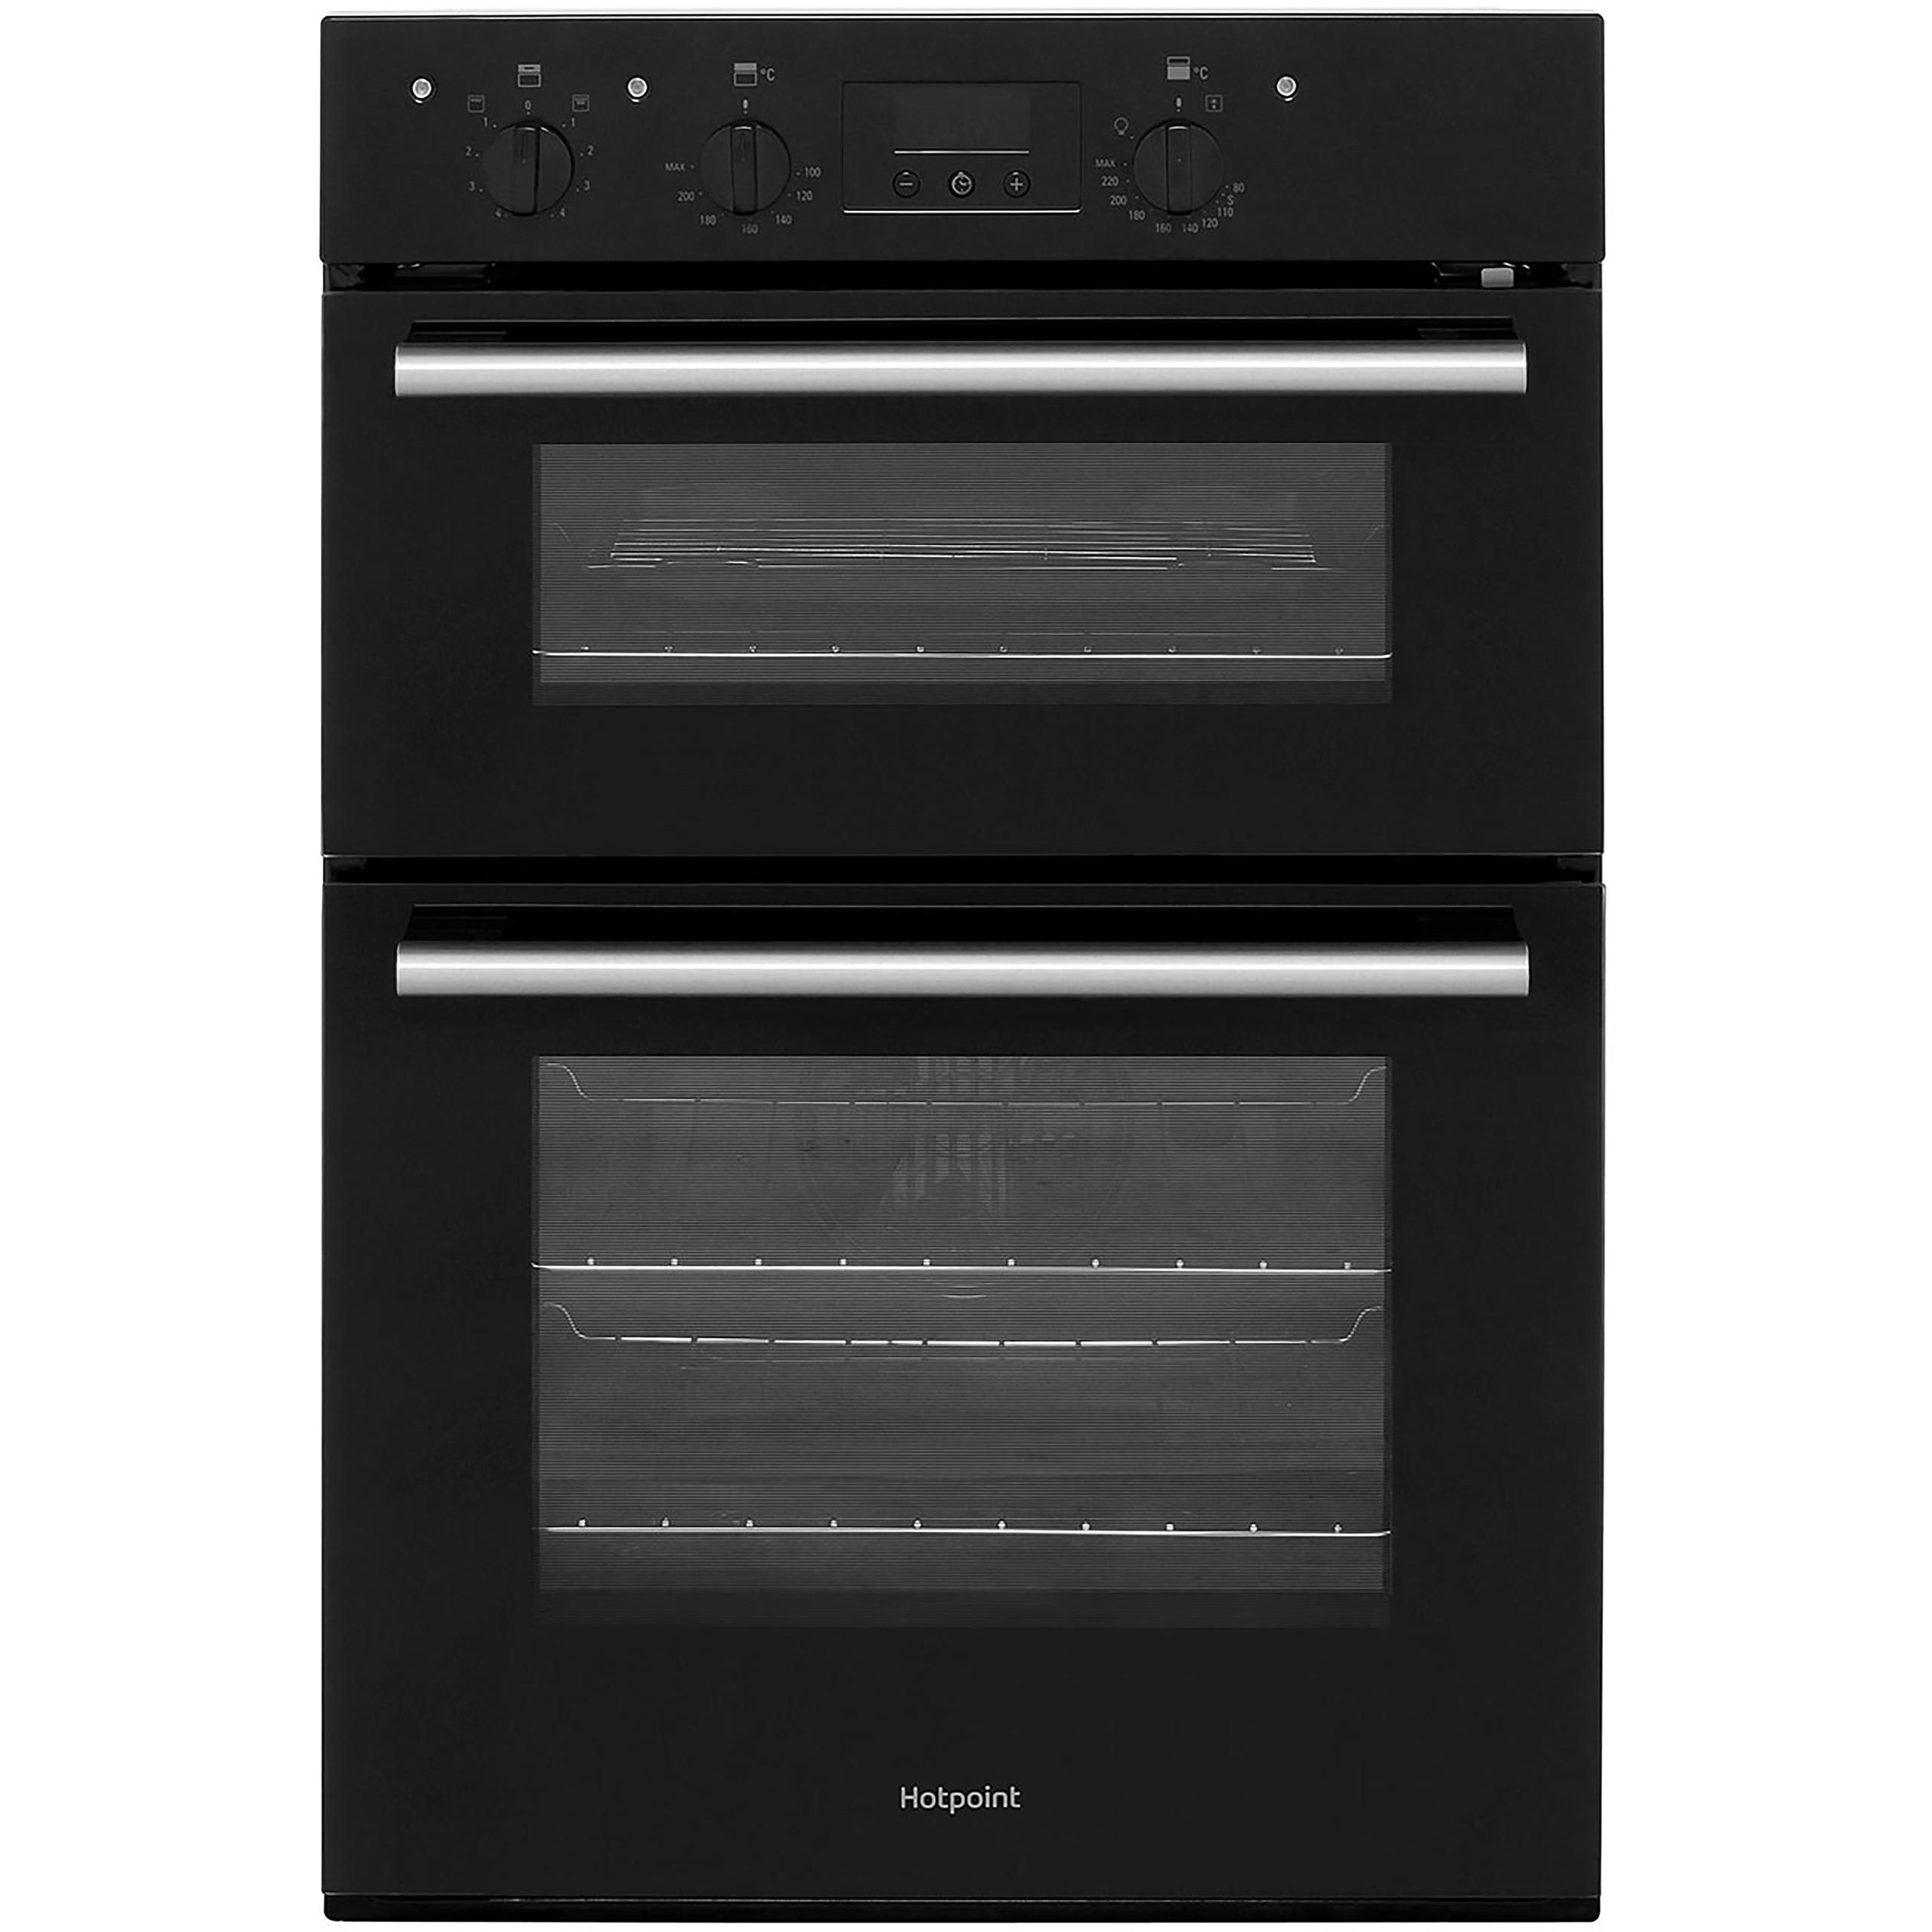 Hotpoint Class 2 DD2540BL Built In Electric Double Oven - Black - A/A Rated, Black